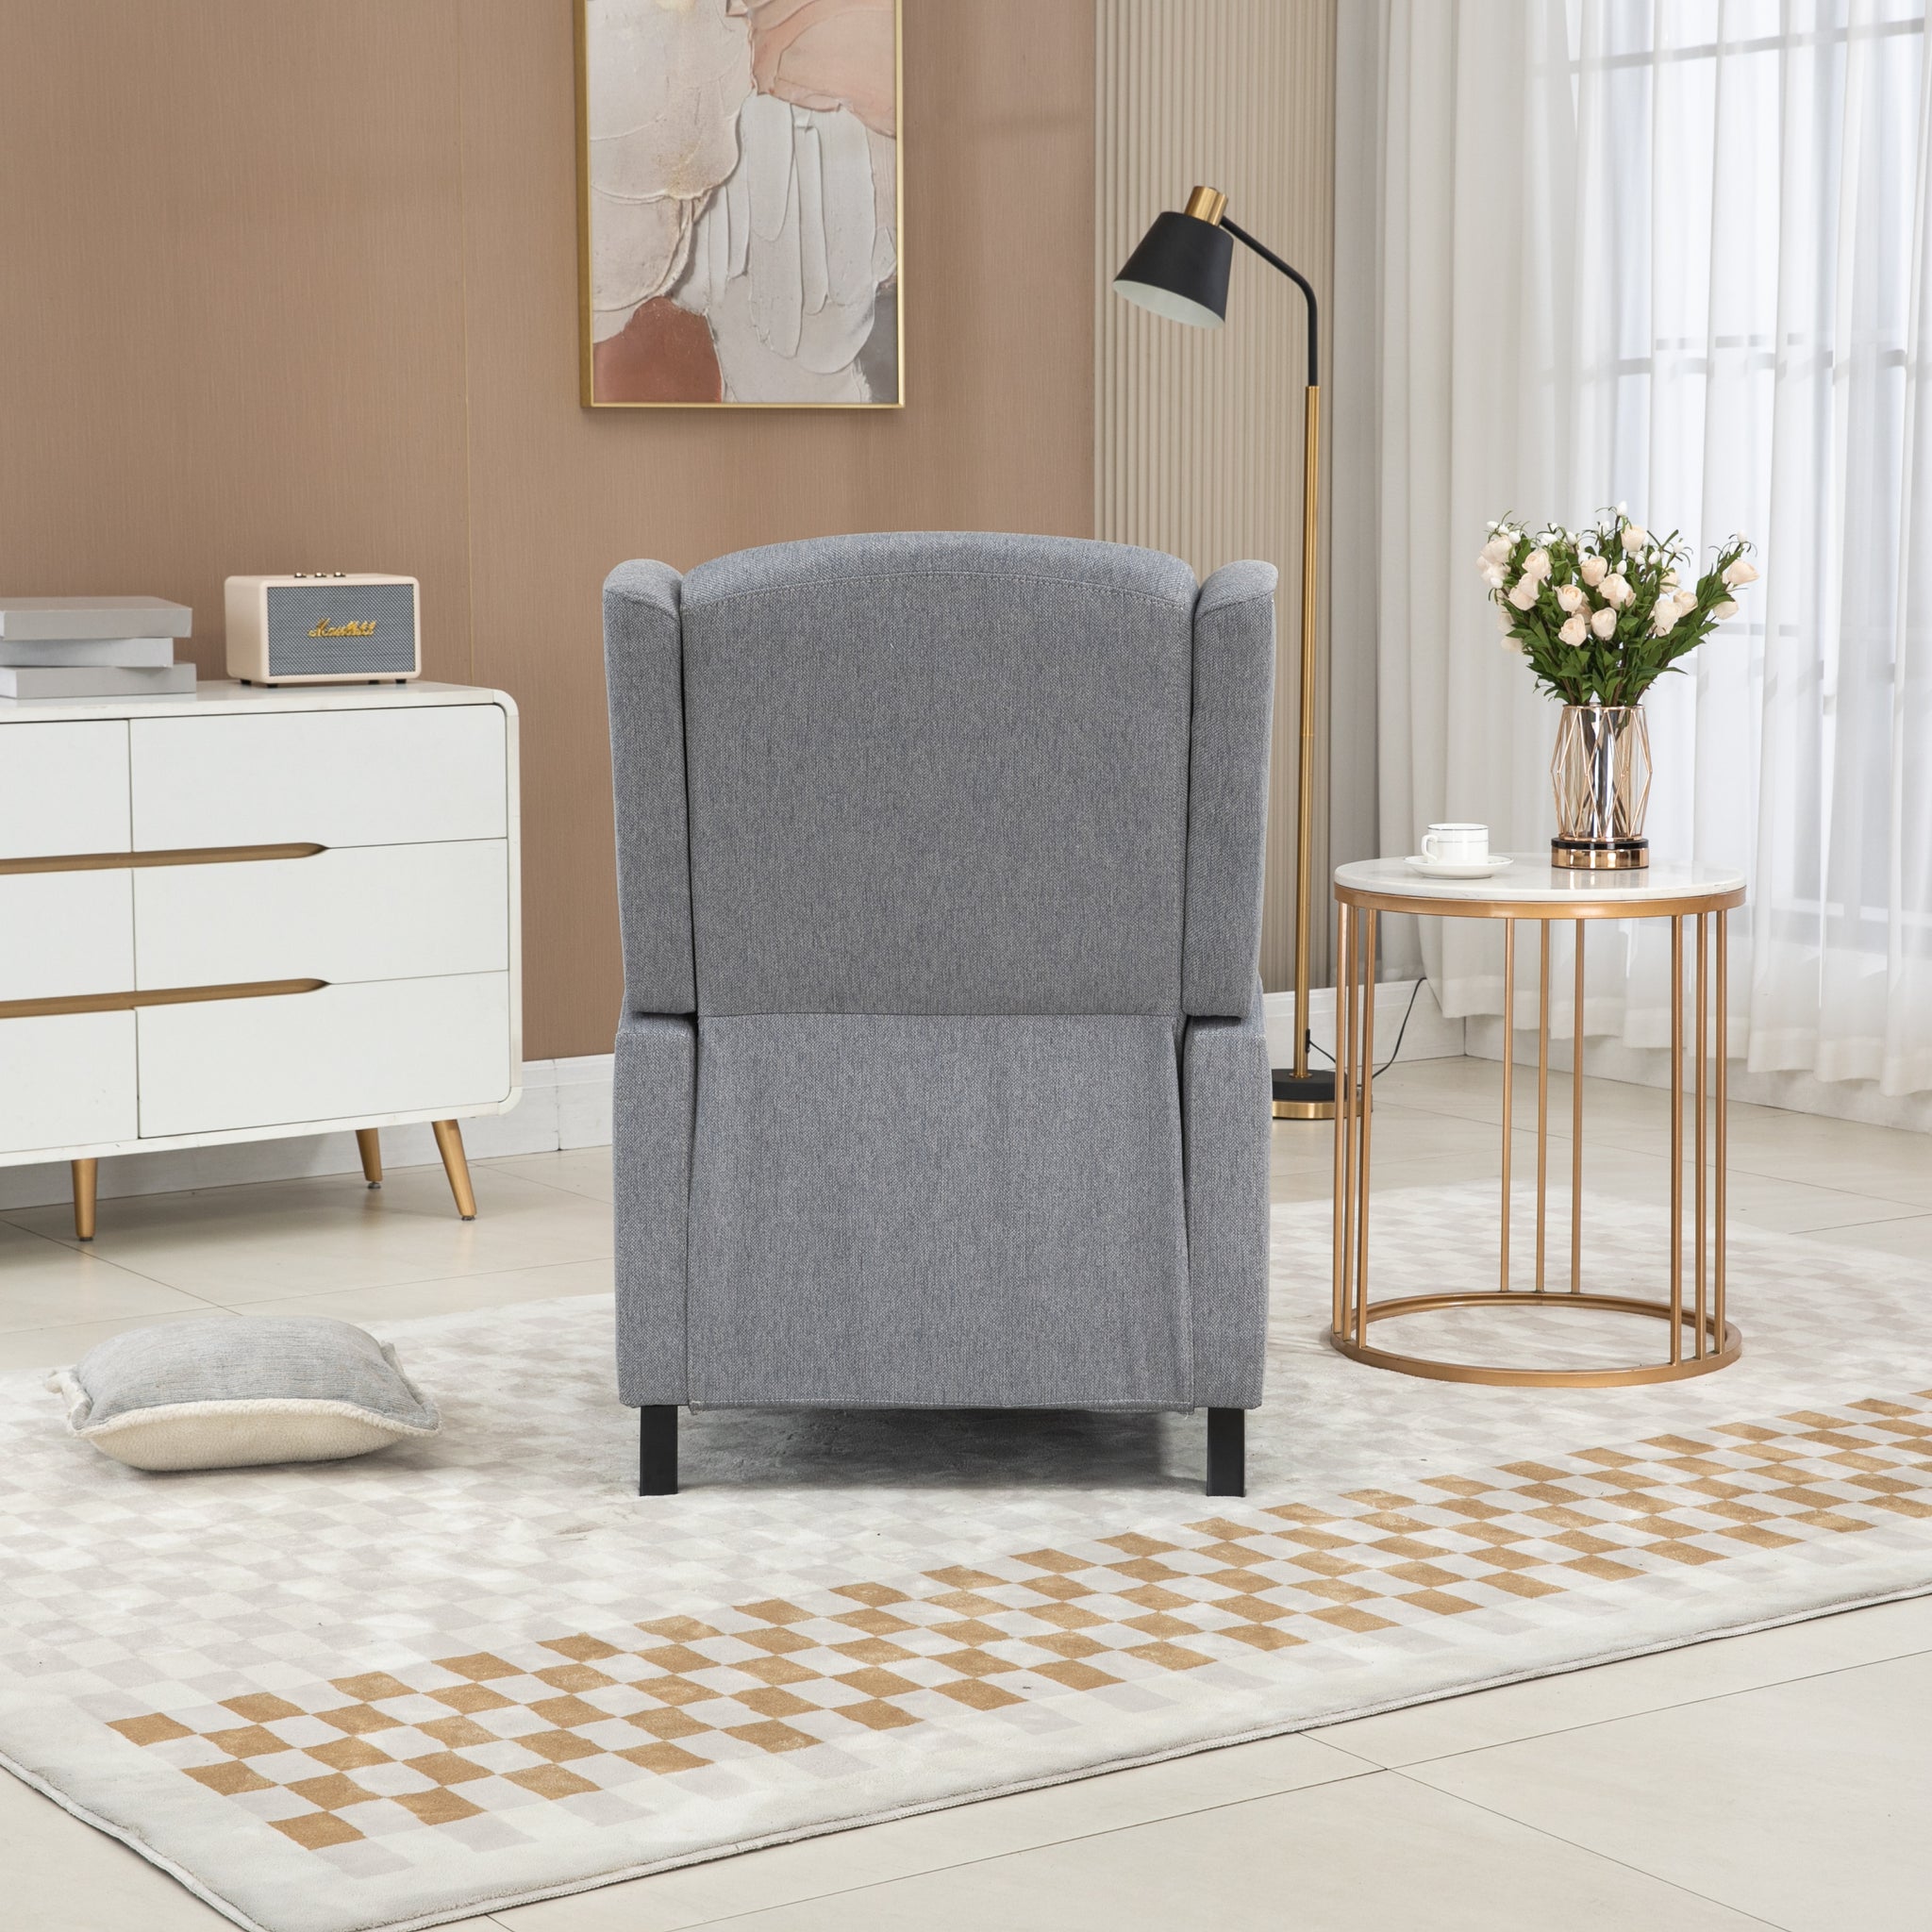 COOLMORE Modern Comfortable Upholstered leisure chair gray-linen